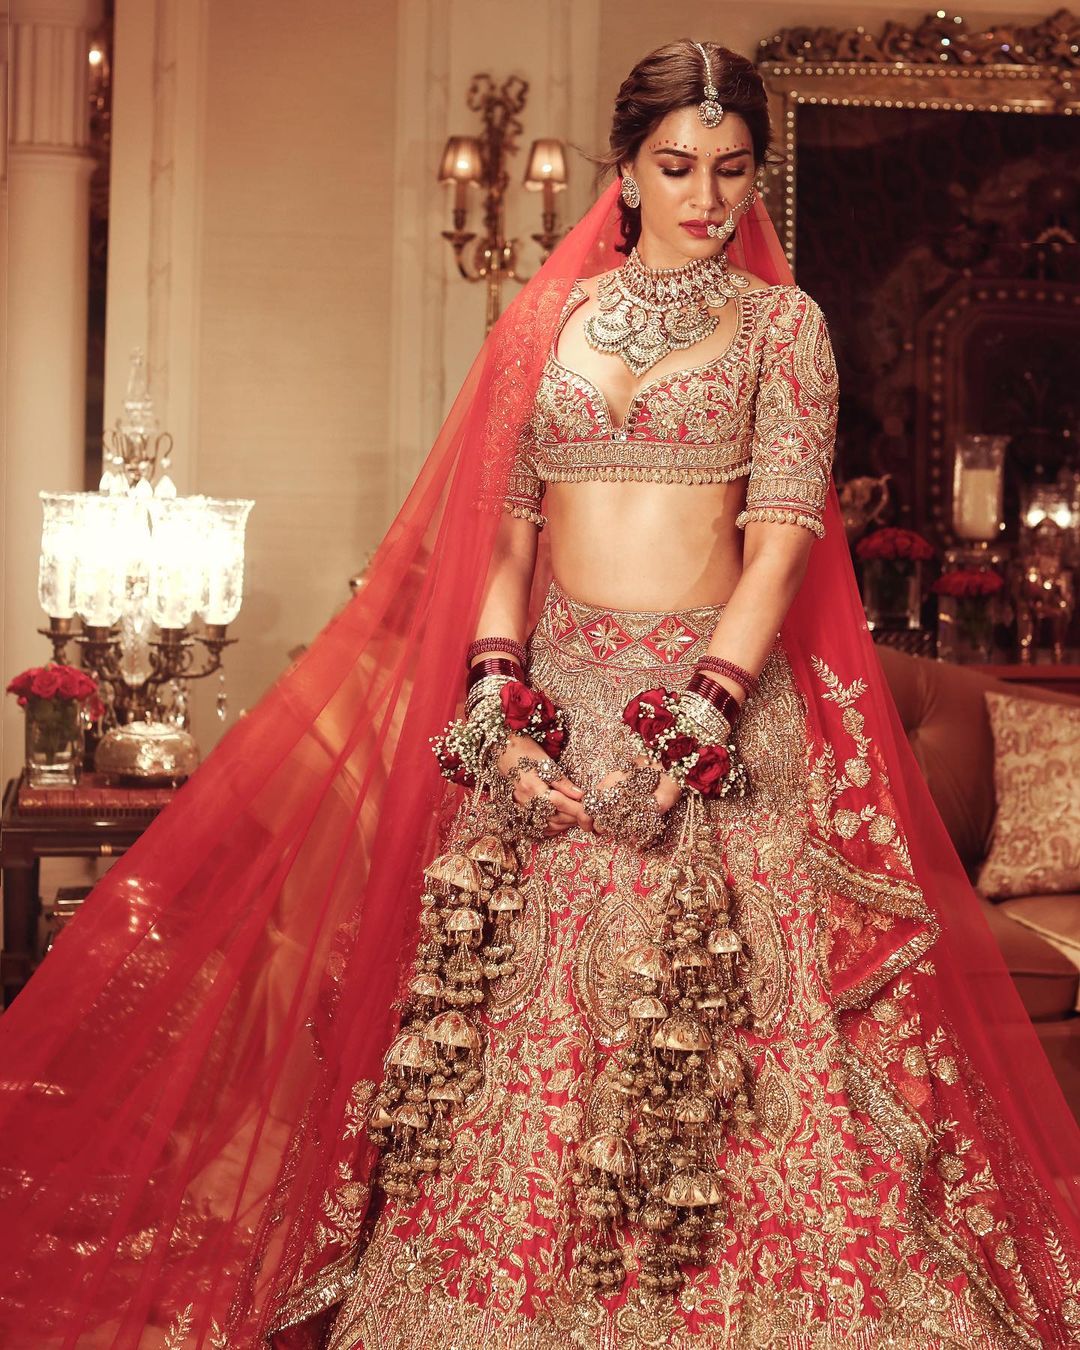 Kriti Sanon Plays Muse For Designer Manish Malhotra Check Out Her Gorgeous Bridal Look